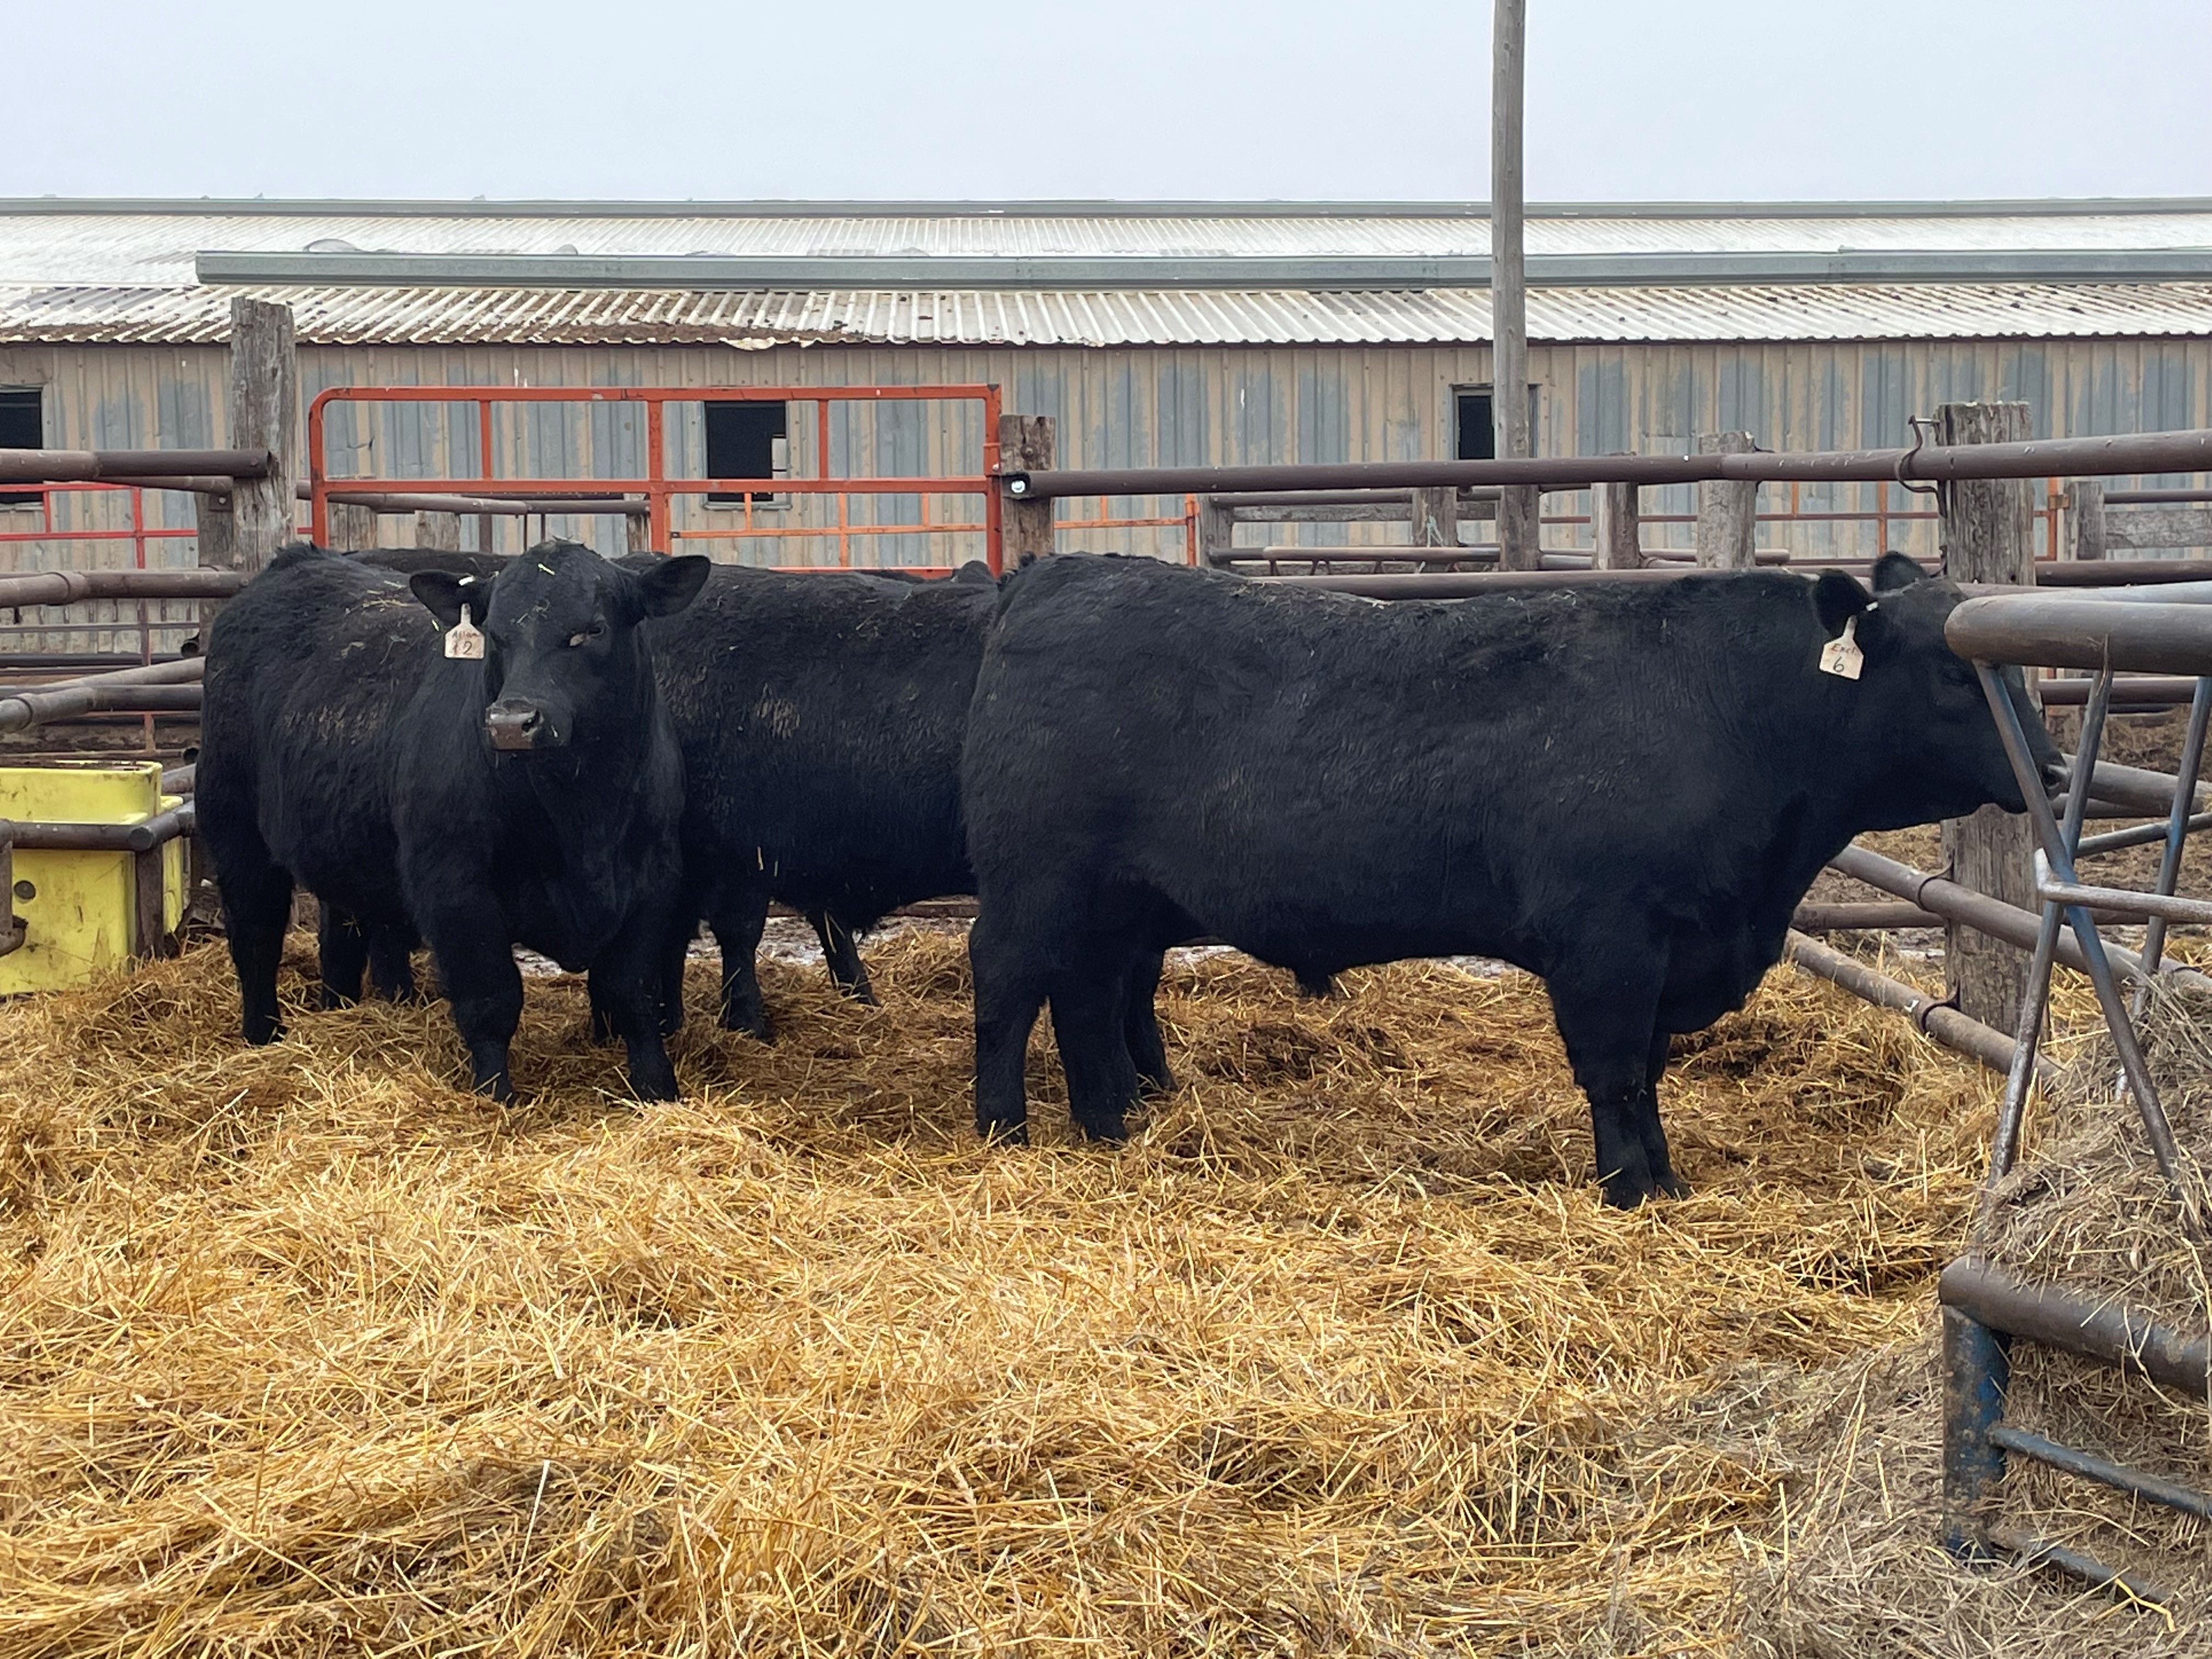 Diet composition, body condition score and nutritional status play a role in reproductive success of bulls. (NDSU photo)